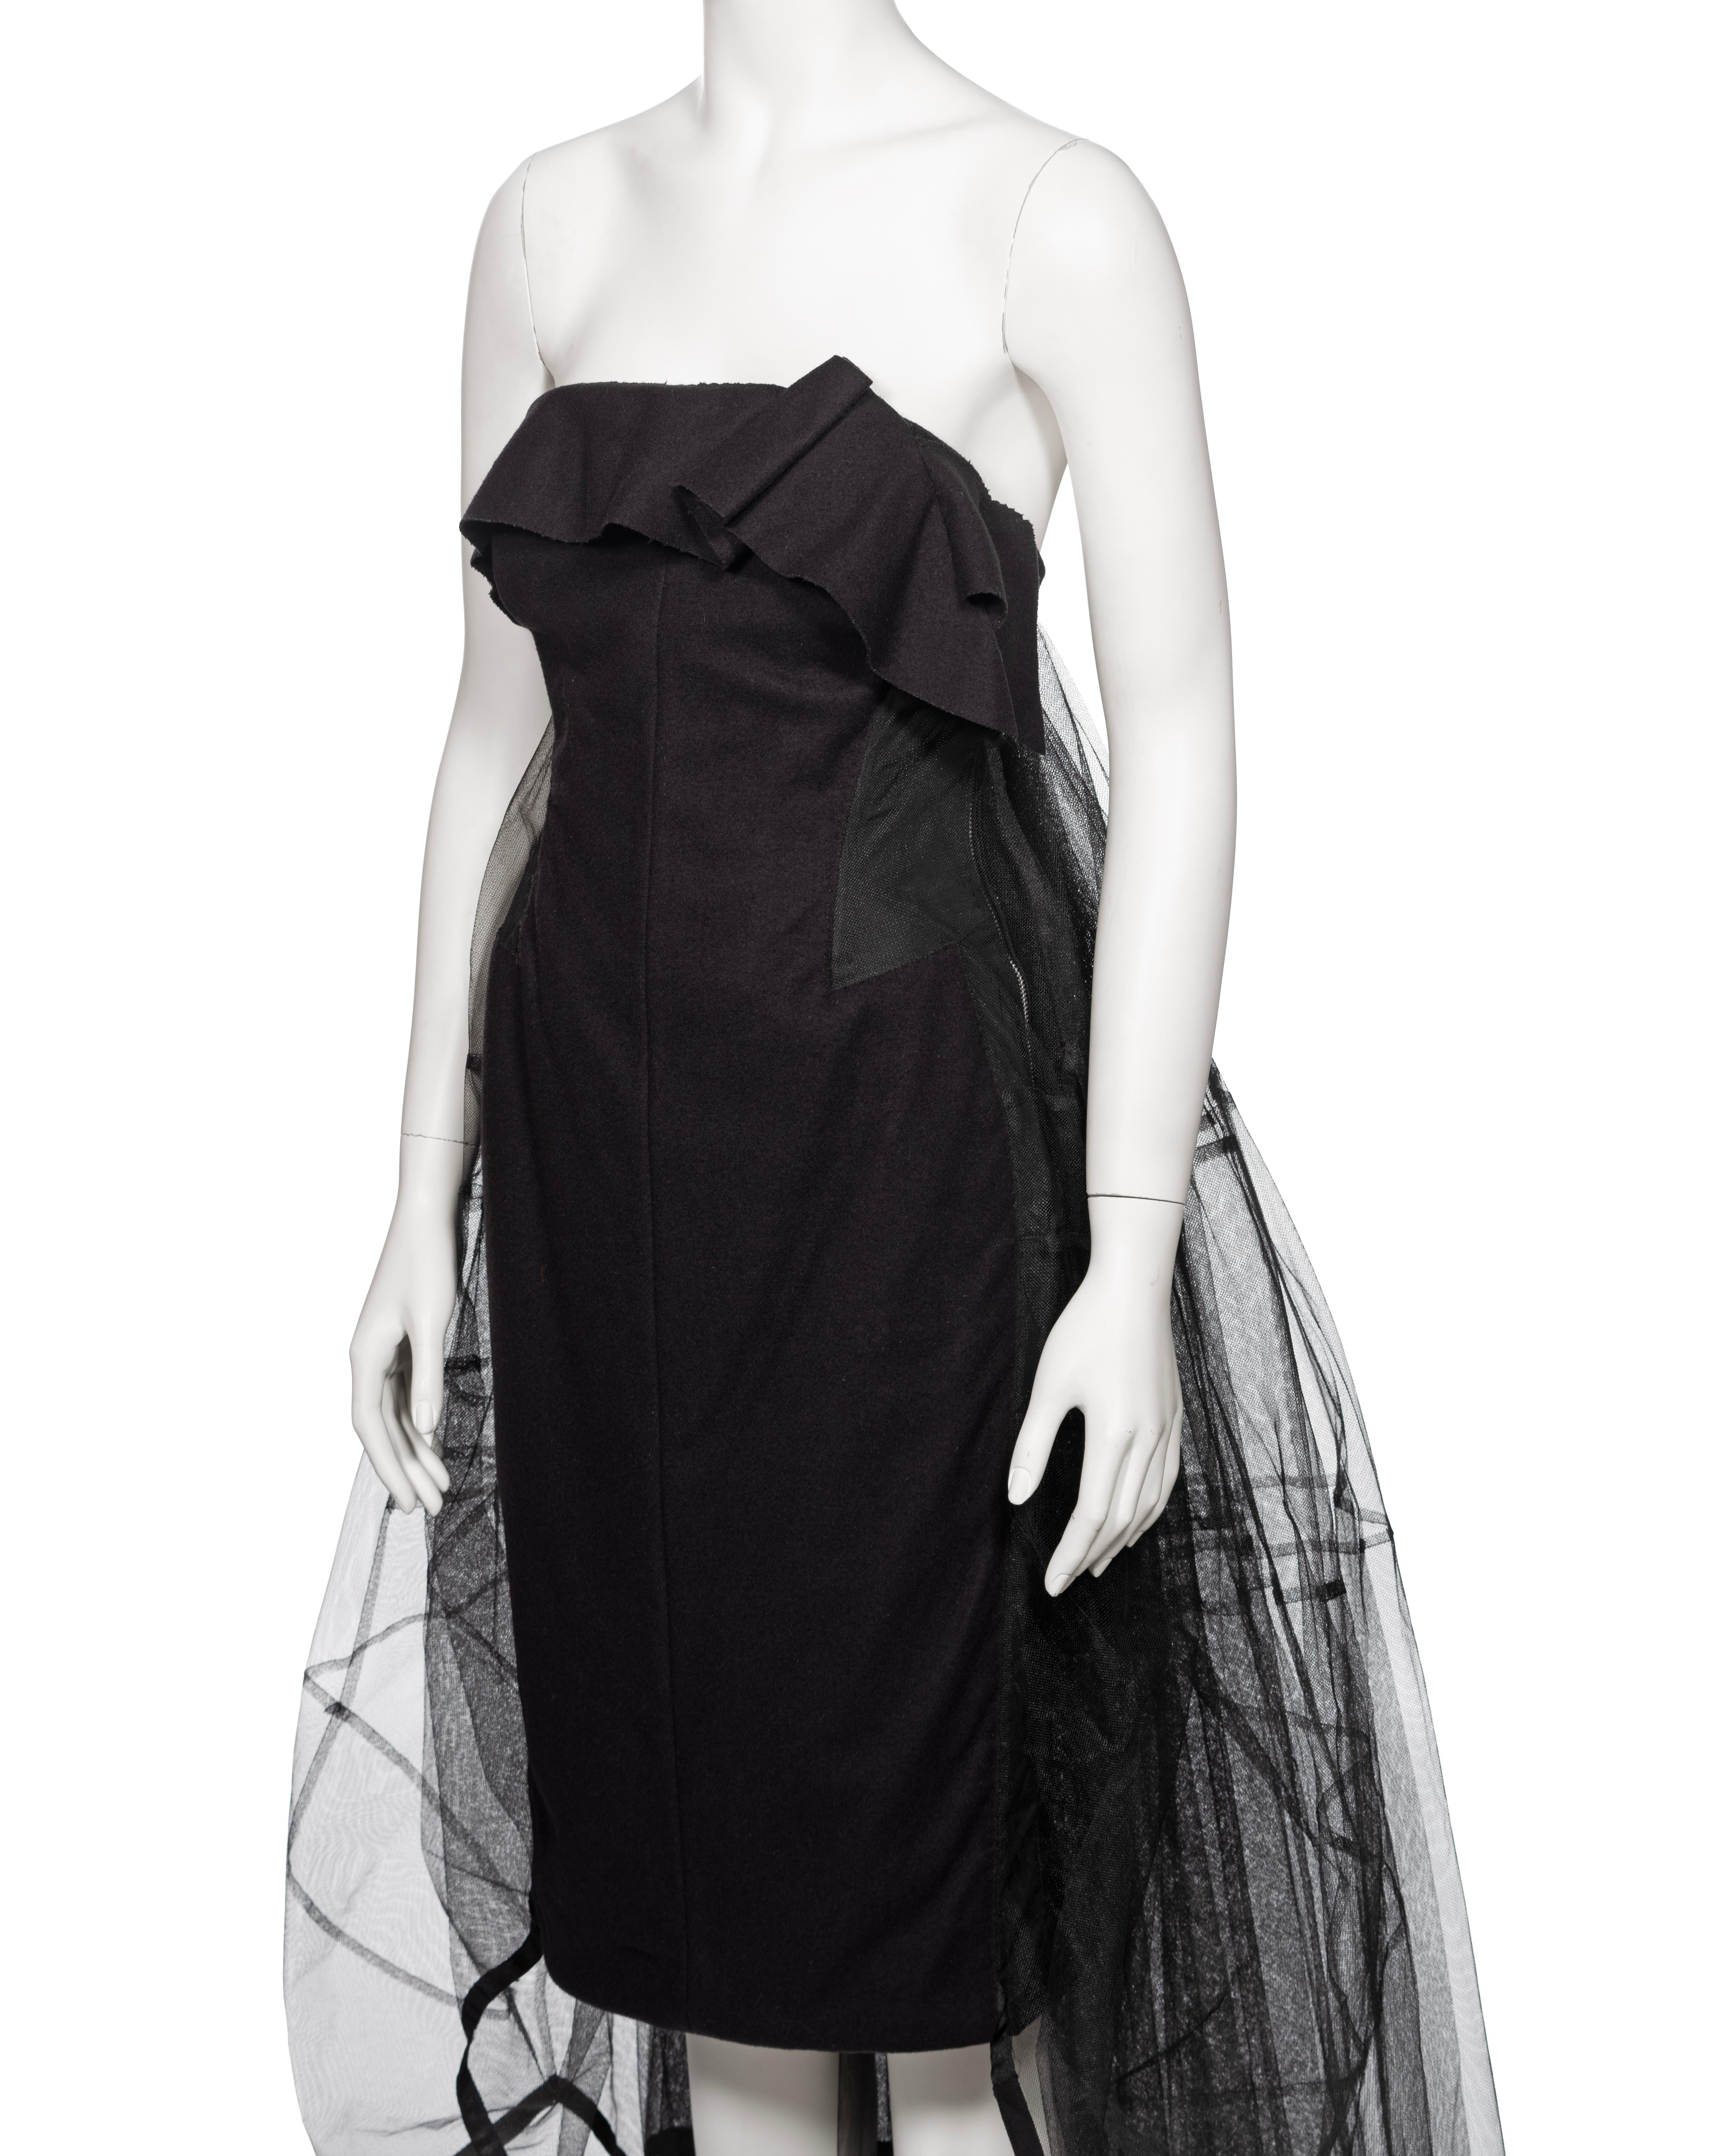 Louis Vuitton by Marc Jacobs Black Wool Strapless Dress with Petticoat, fw 2008 For Sale 3